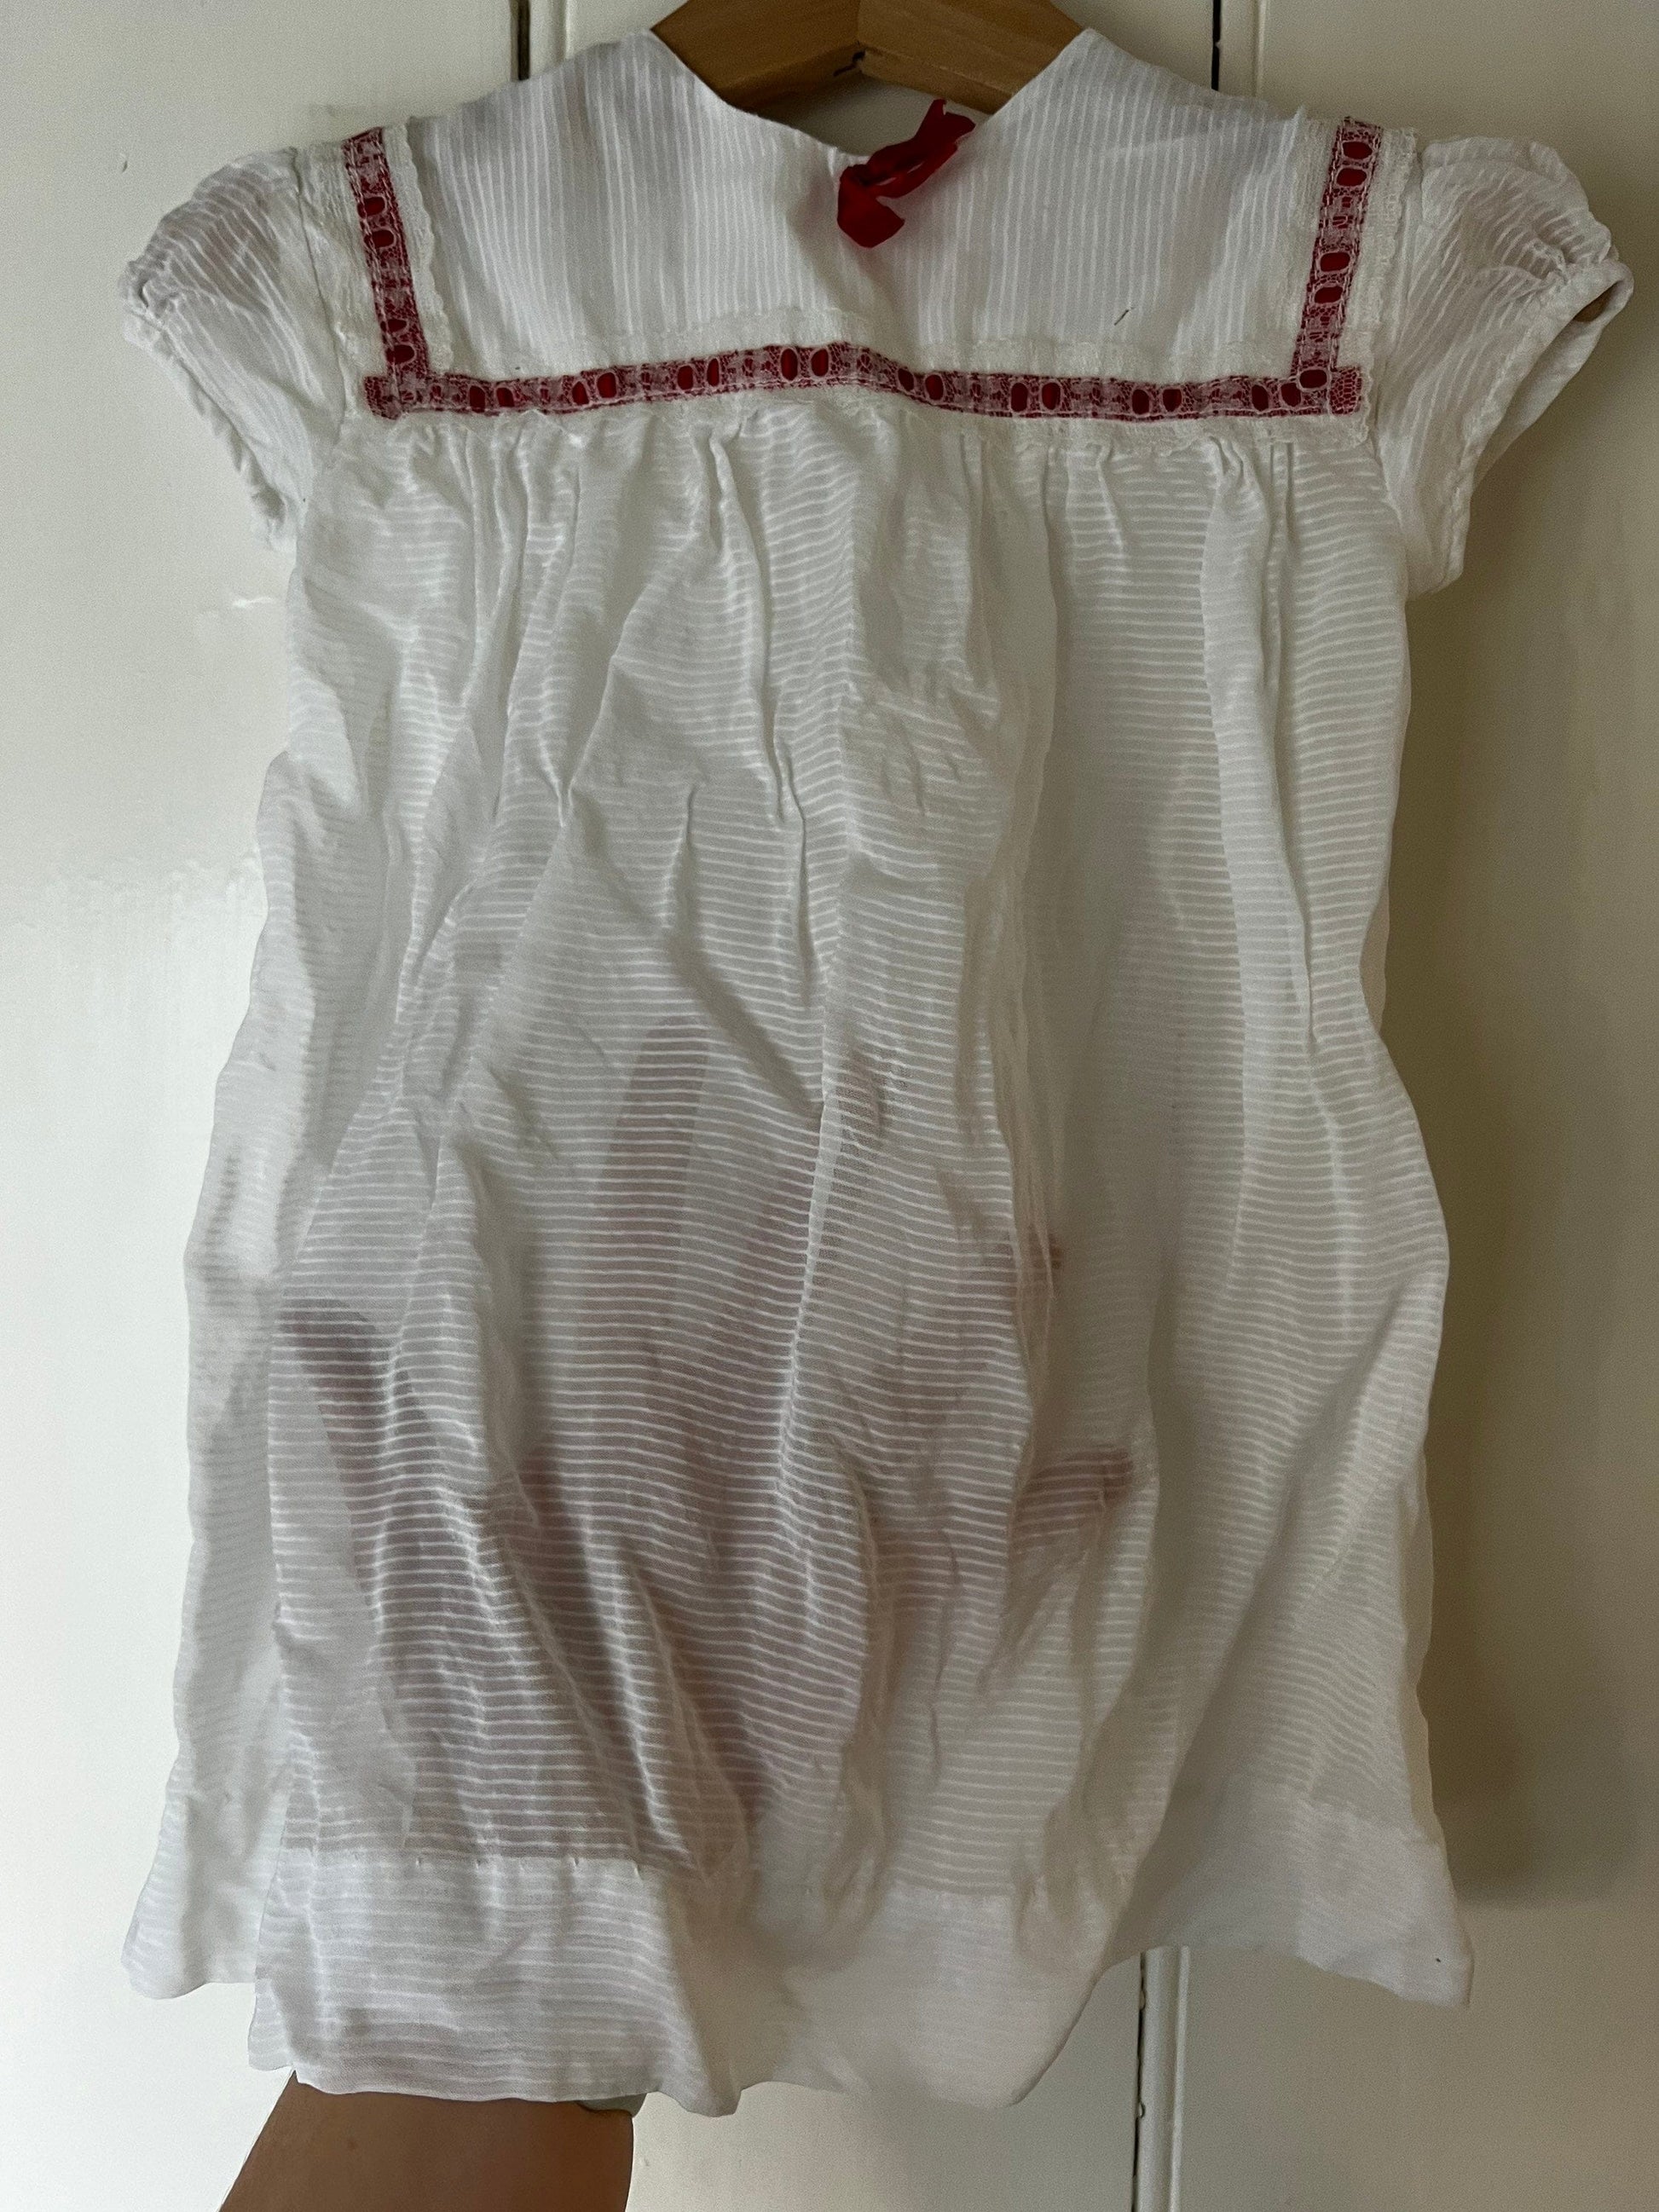 Vintage Girls Dress - white and red terylene Dress Baby Dress age 2-3 years